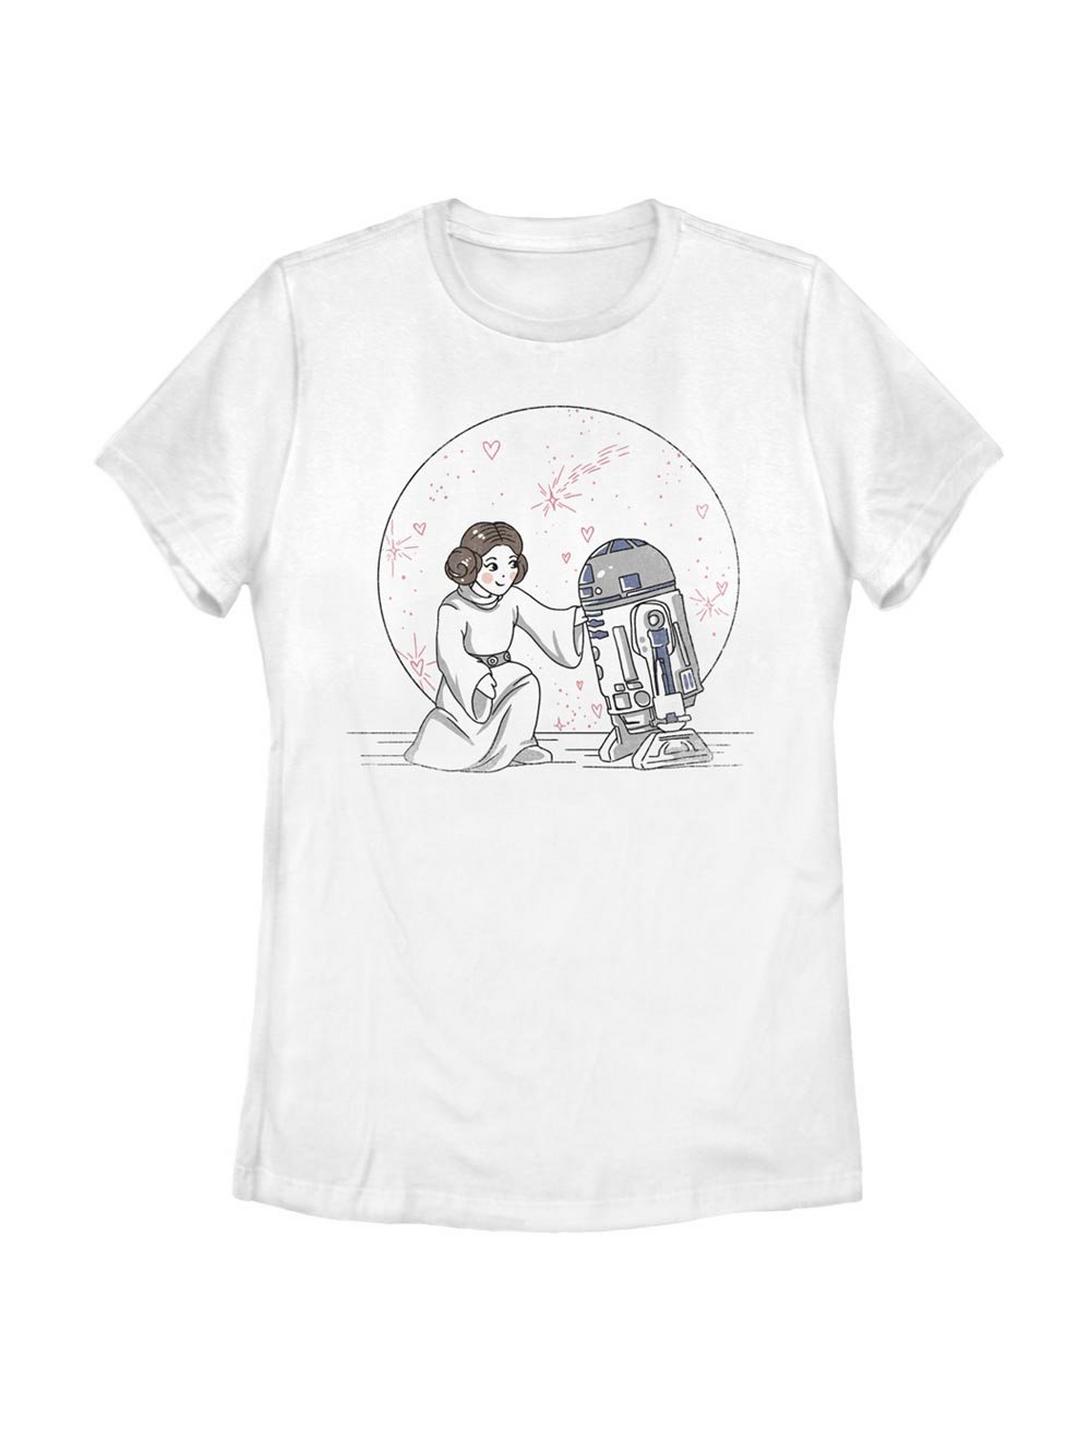 Star Wars Friends In Space Womens T-Shirt, WHITE, hi-res